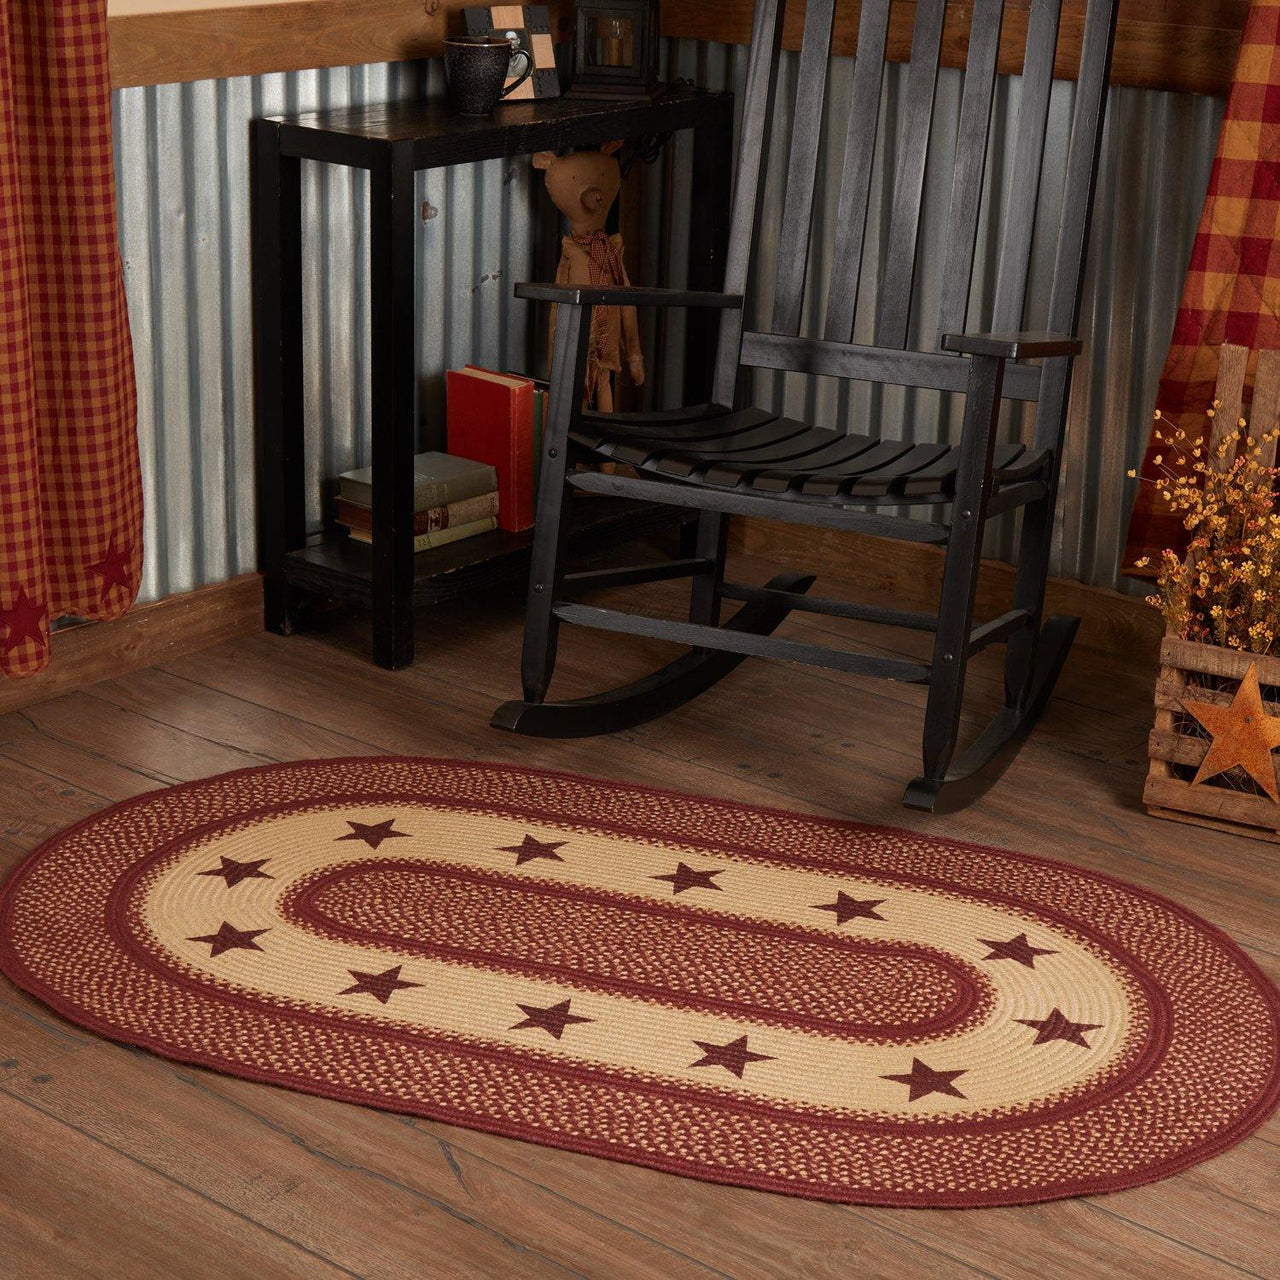 Burgundy Red Primitive Jute Braided Rug Oval Stencil Stars 3'x5' with Rug Pad VHC Brands - The Fox Decor